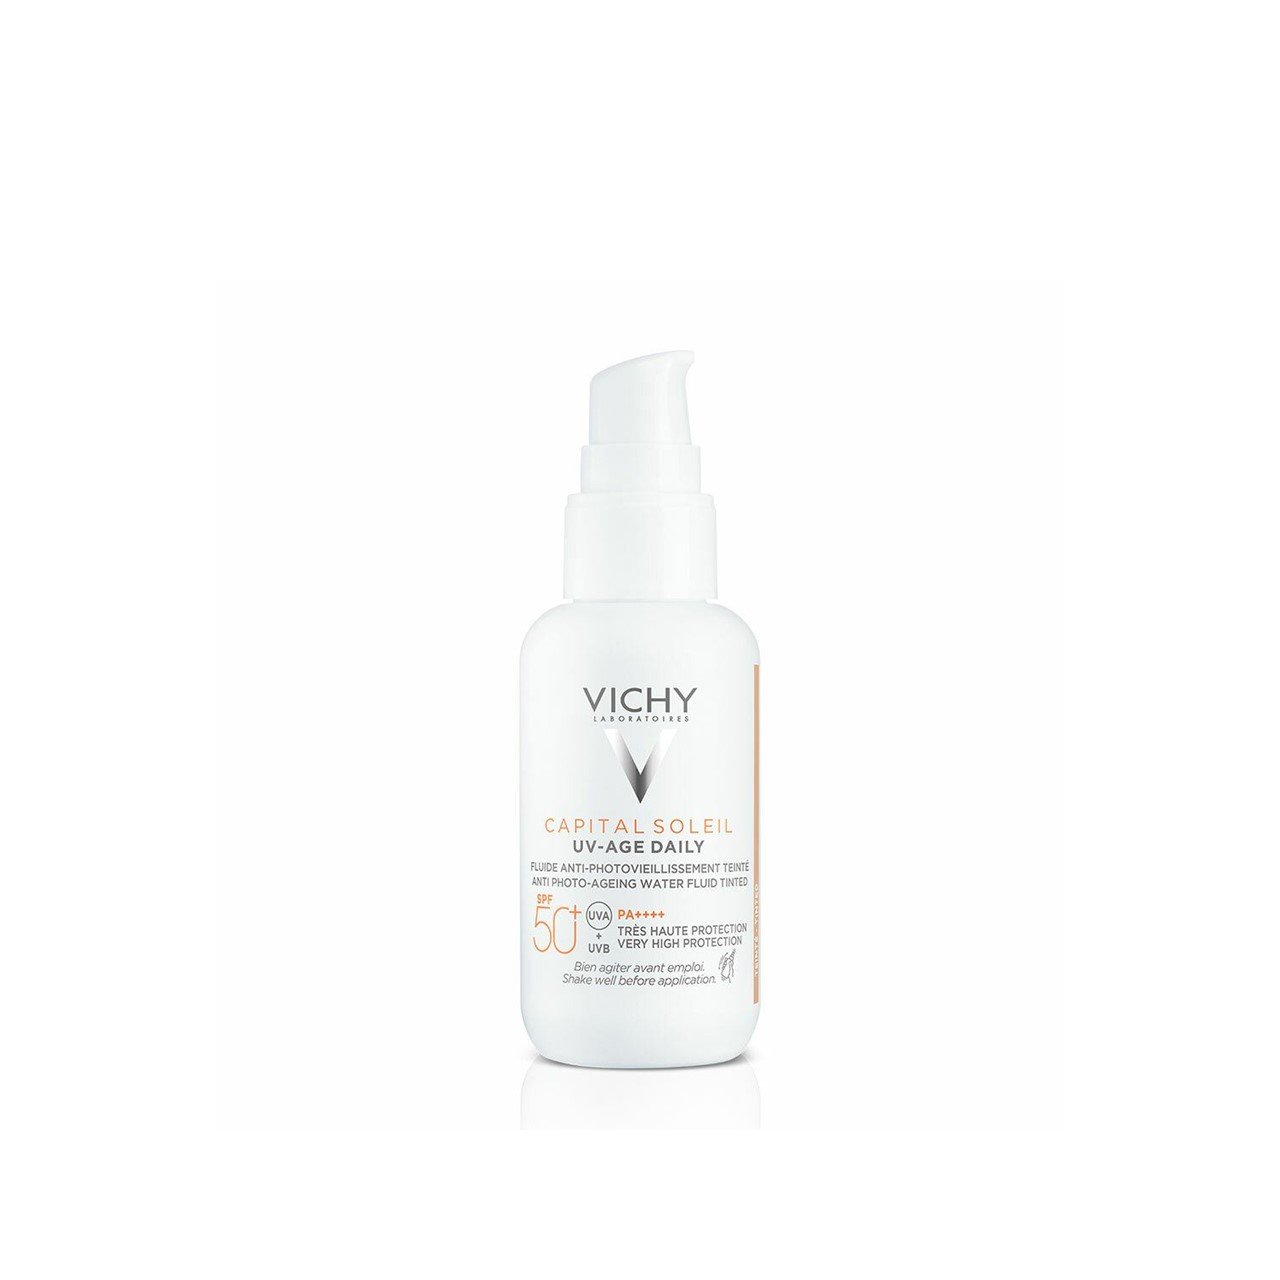 Vichy Capital Soleil UV-Age Daily Water Fluid Tinted SPF50+ 40ml